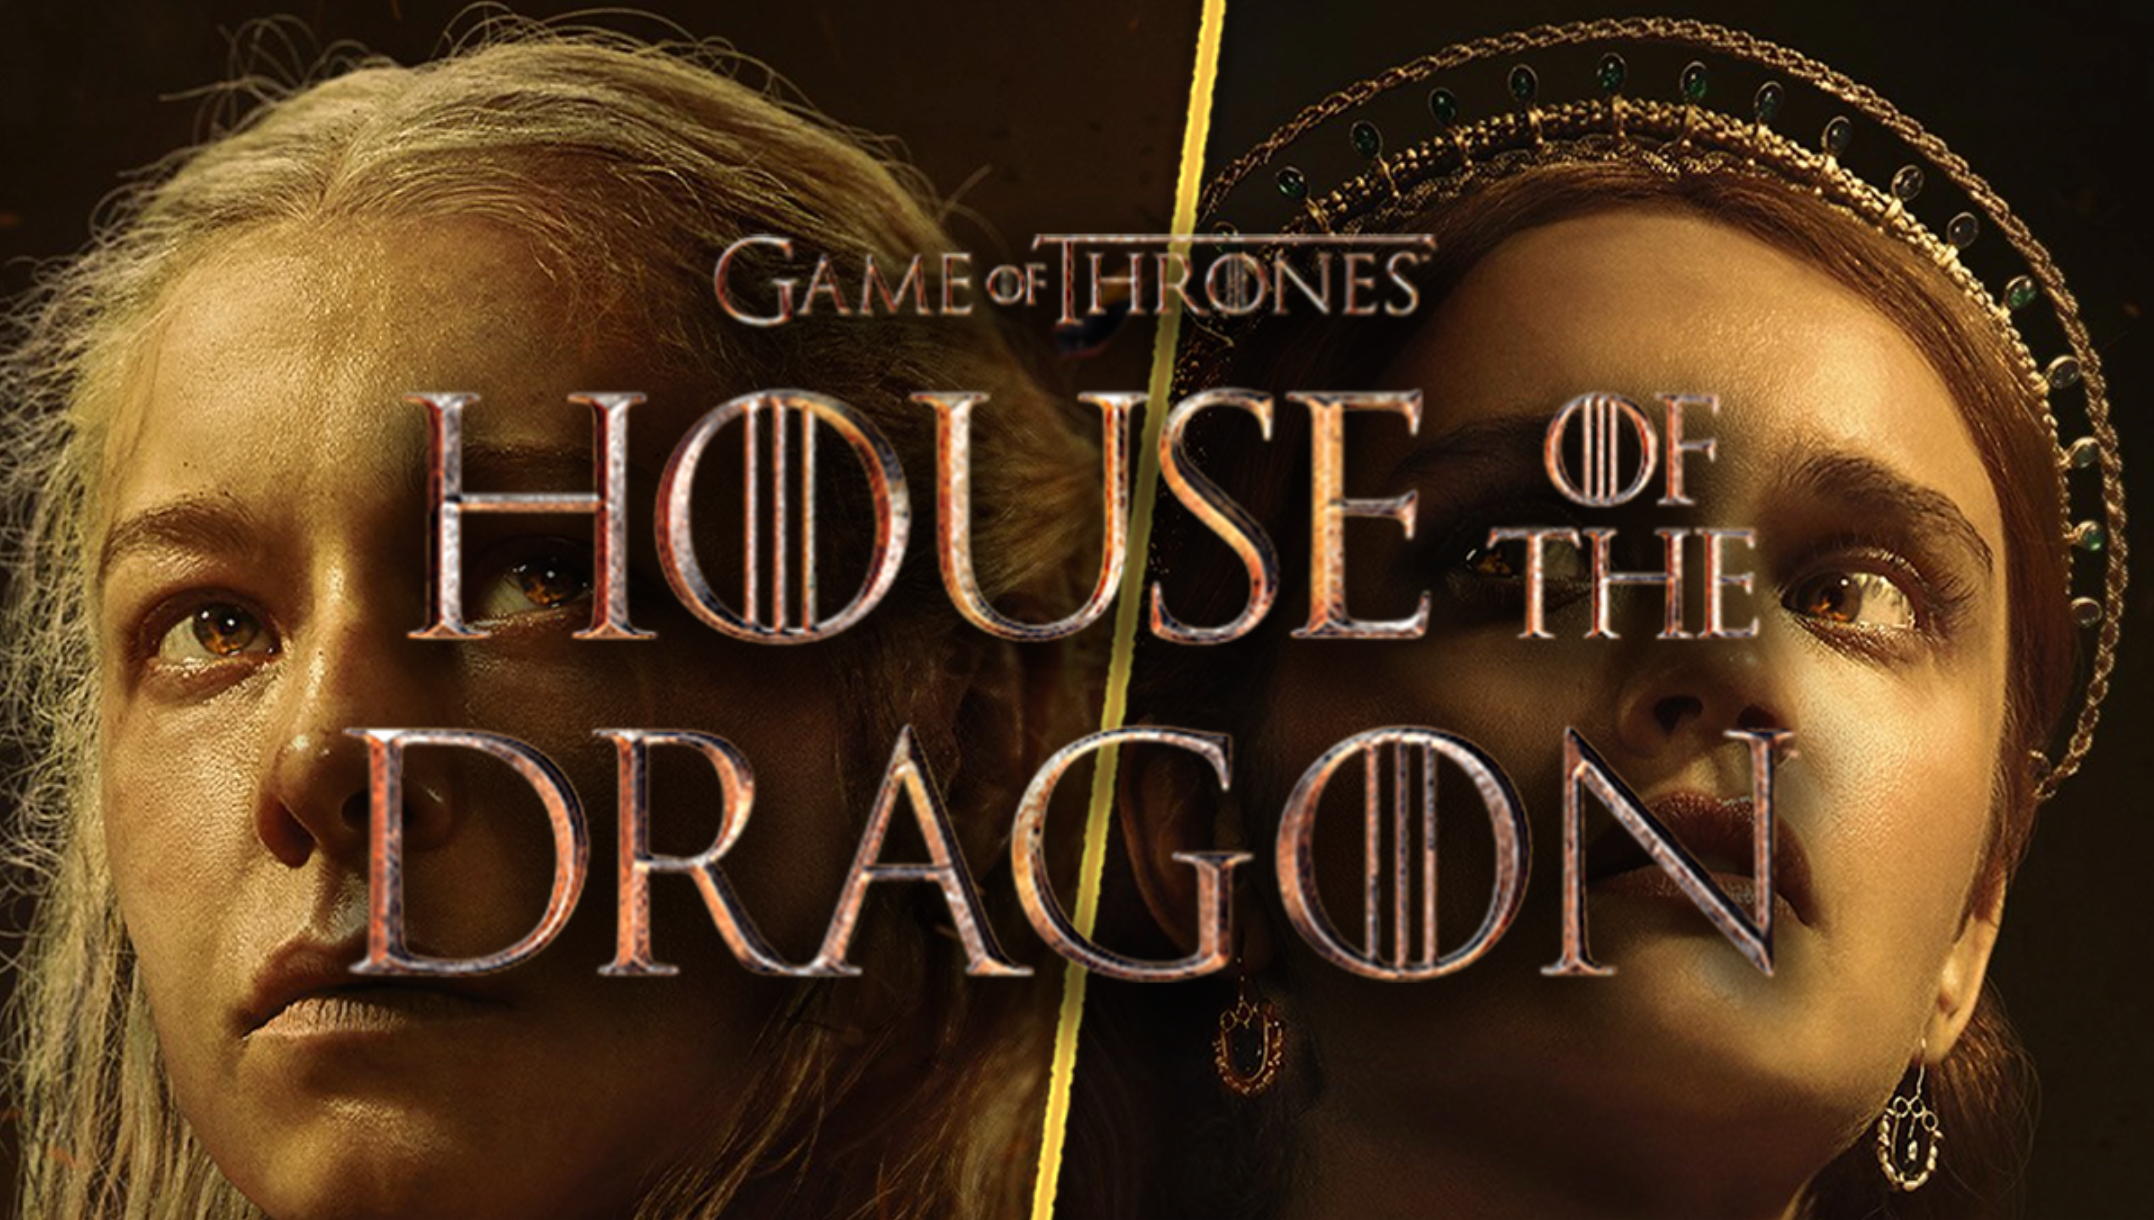 House of the Dragon' Season 2 Trailer, Release Date Details